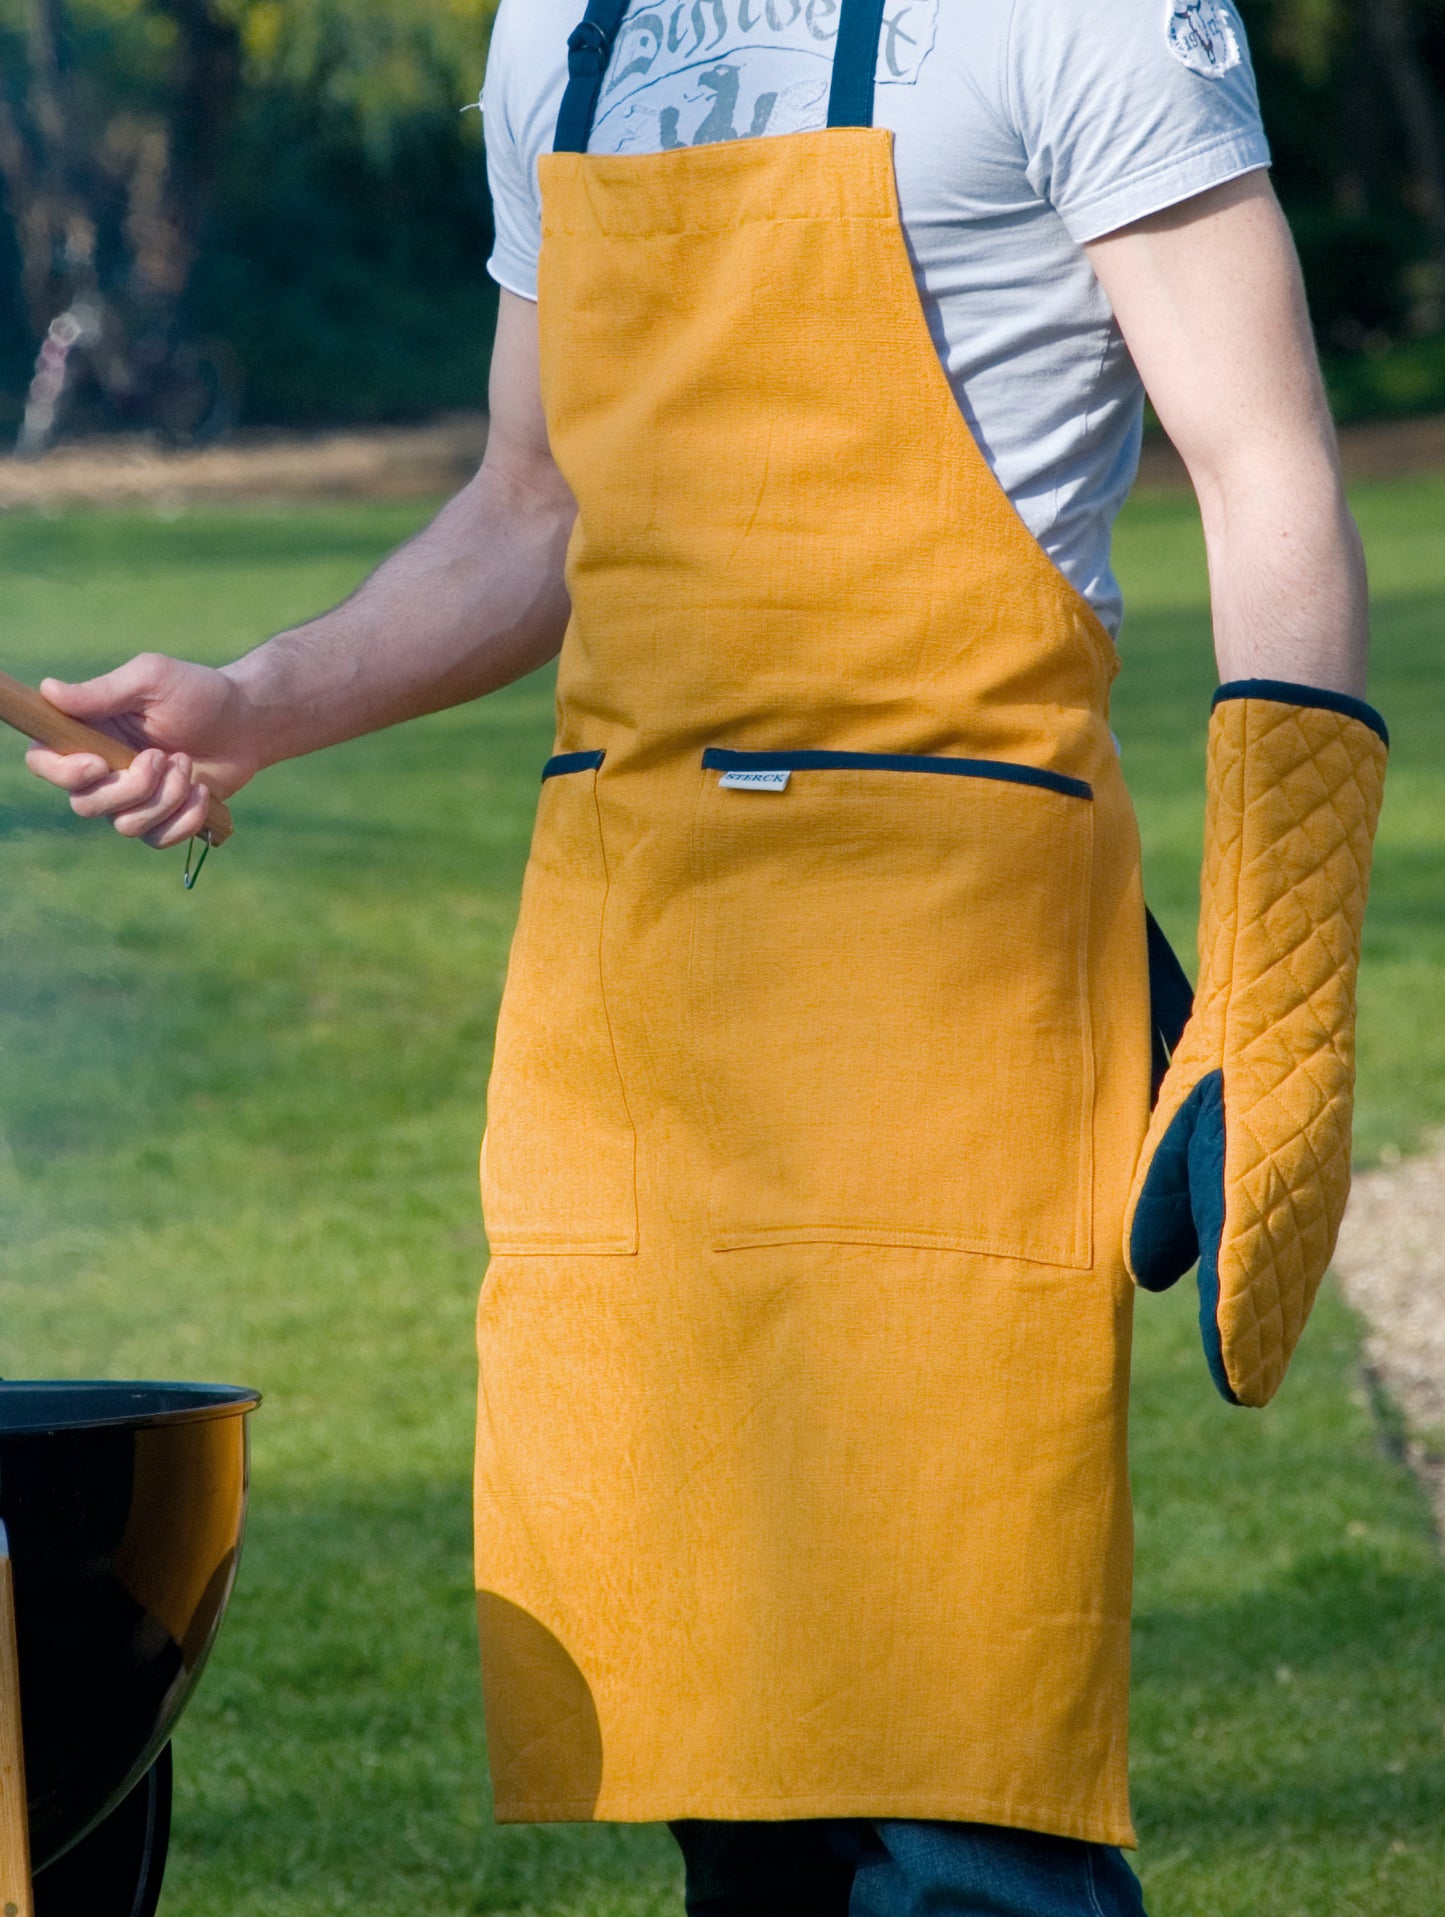 lithe young fellow bbqing with yellow and aqua-green oven gauntlet from sterck & co.